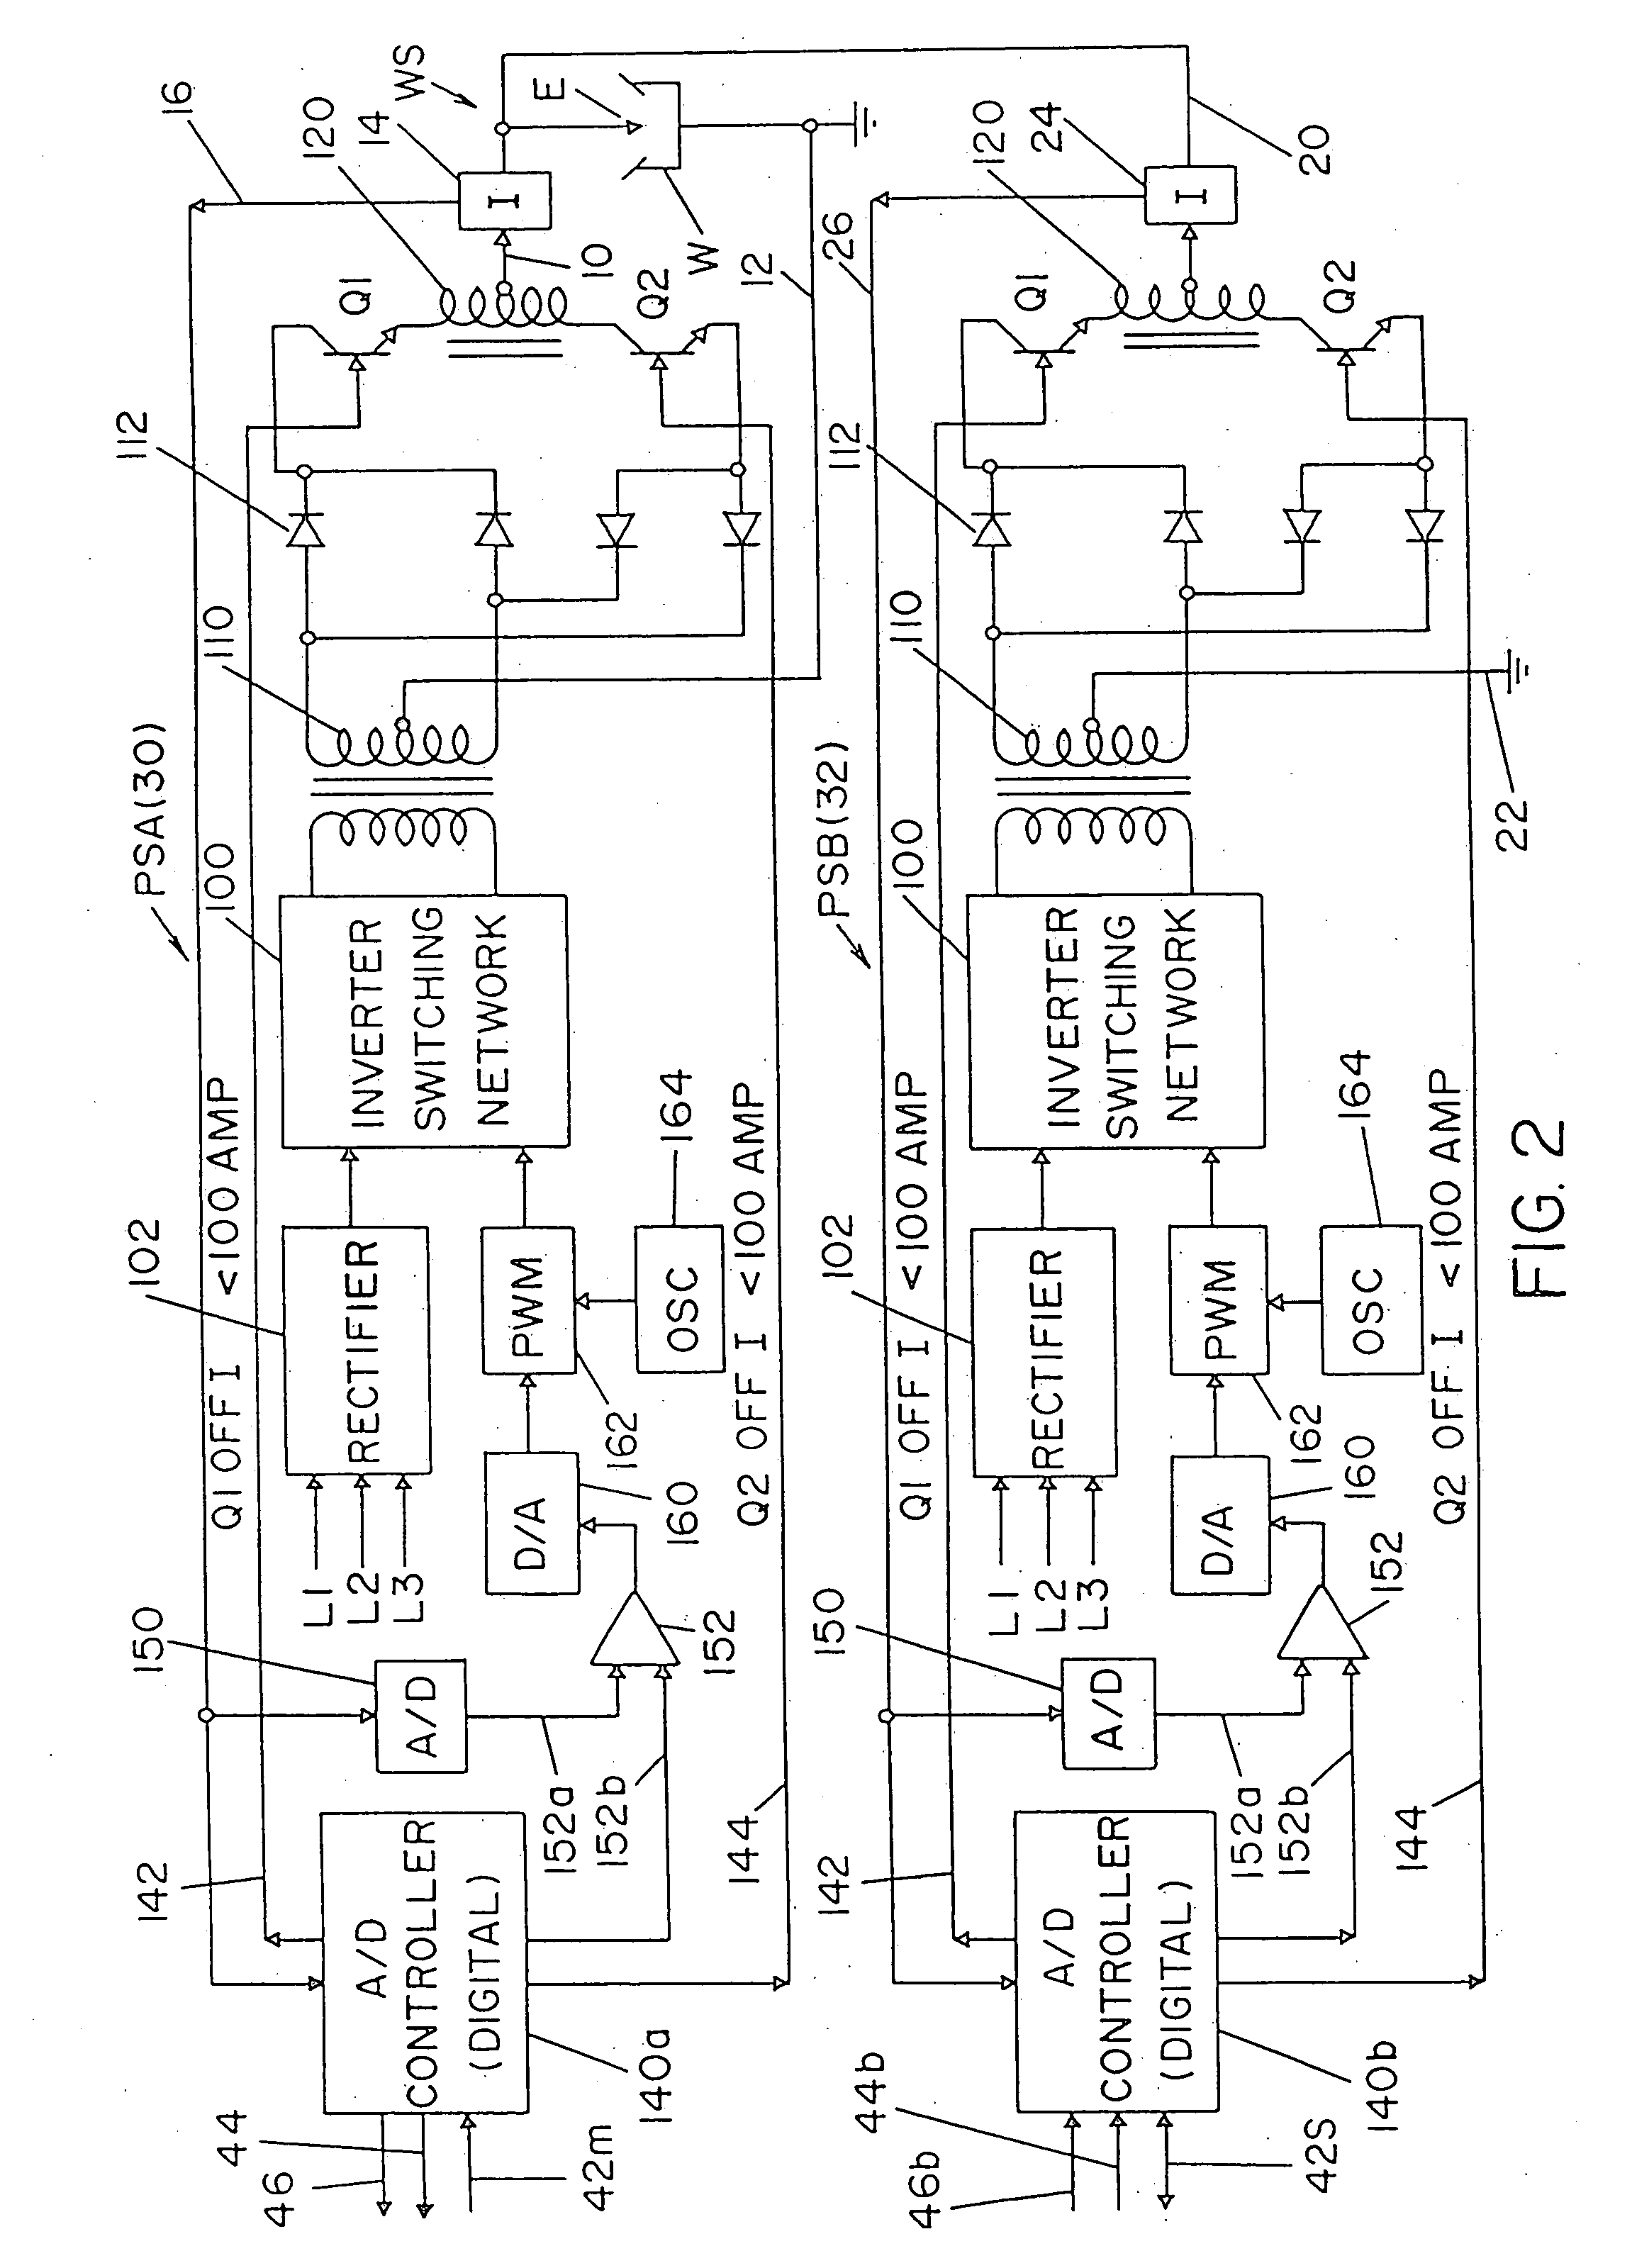 Method of AC welding with cored electrode